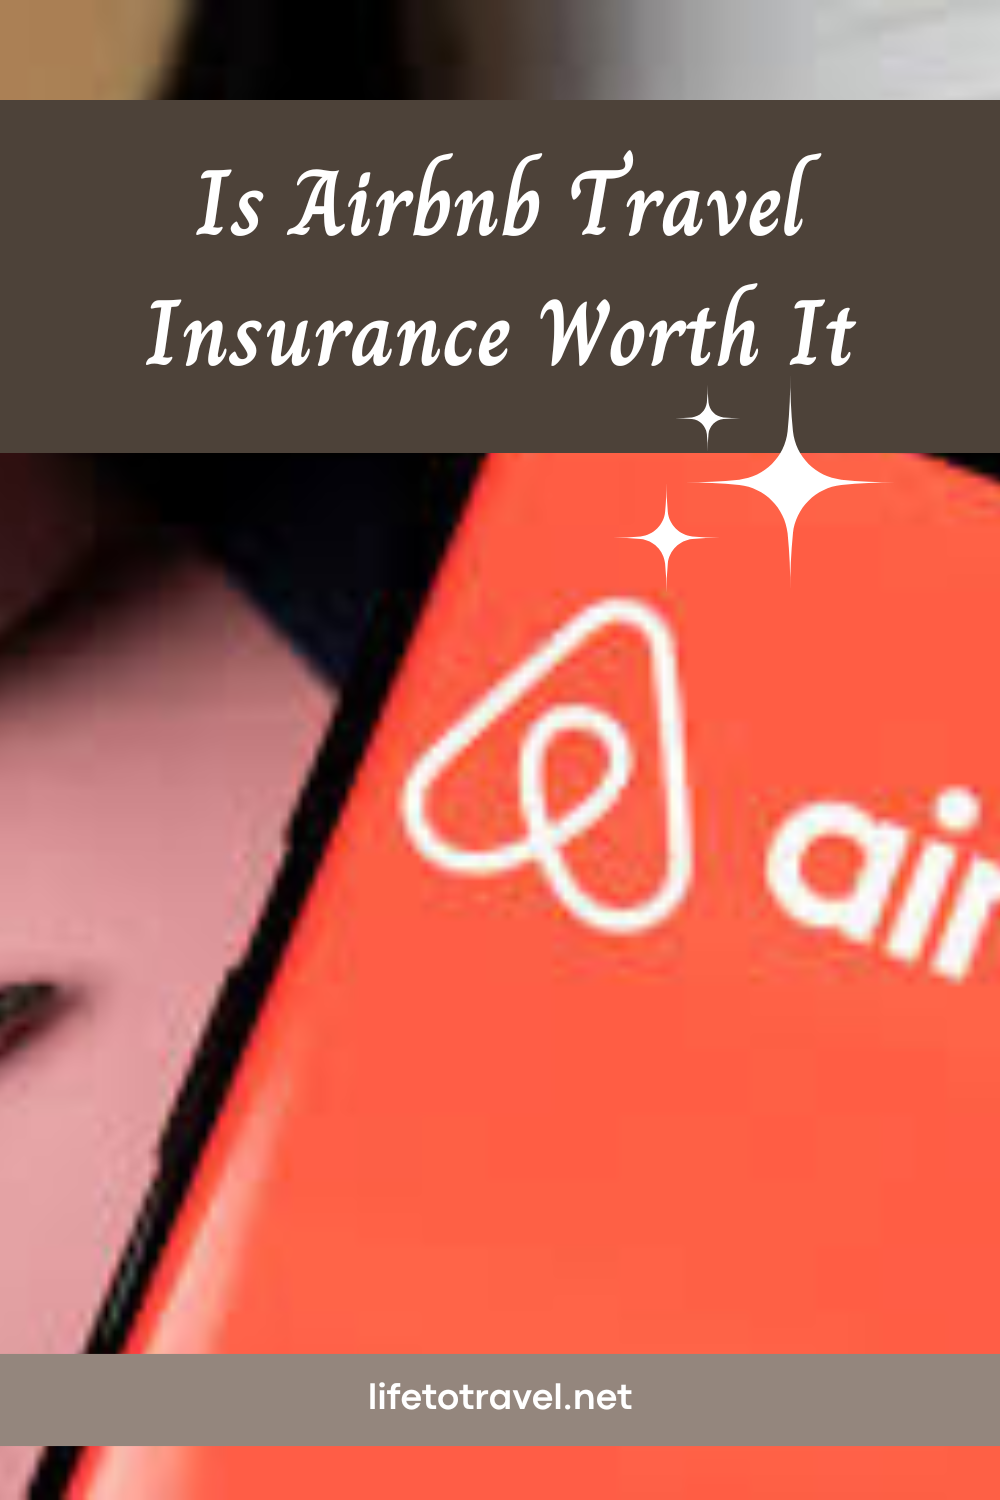 is travel insurance worth it for airbnb